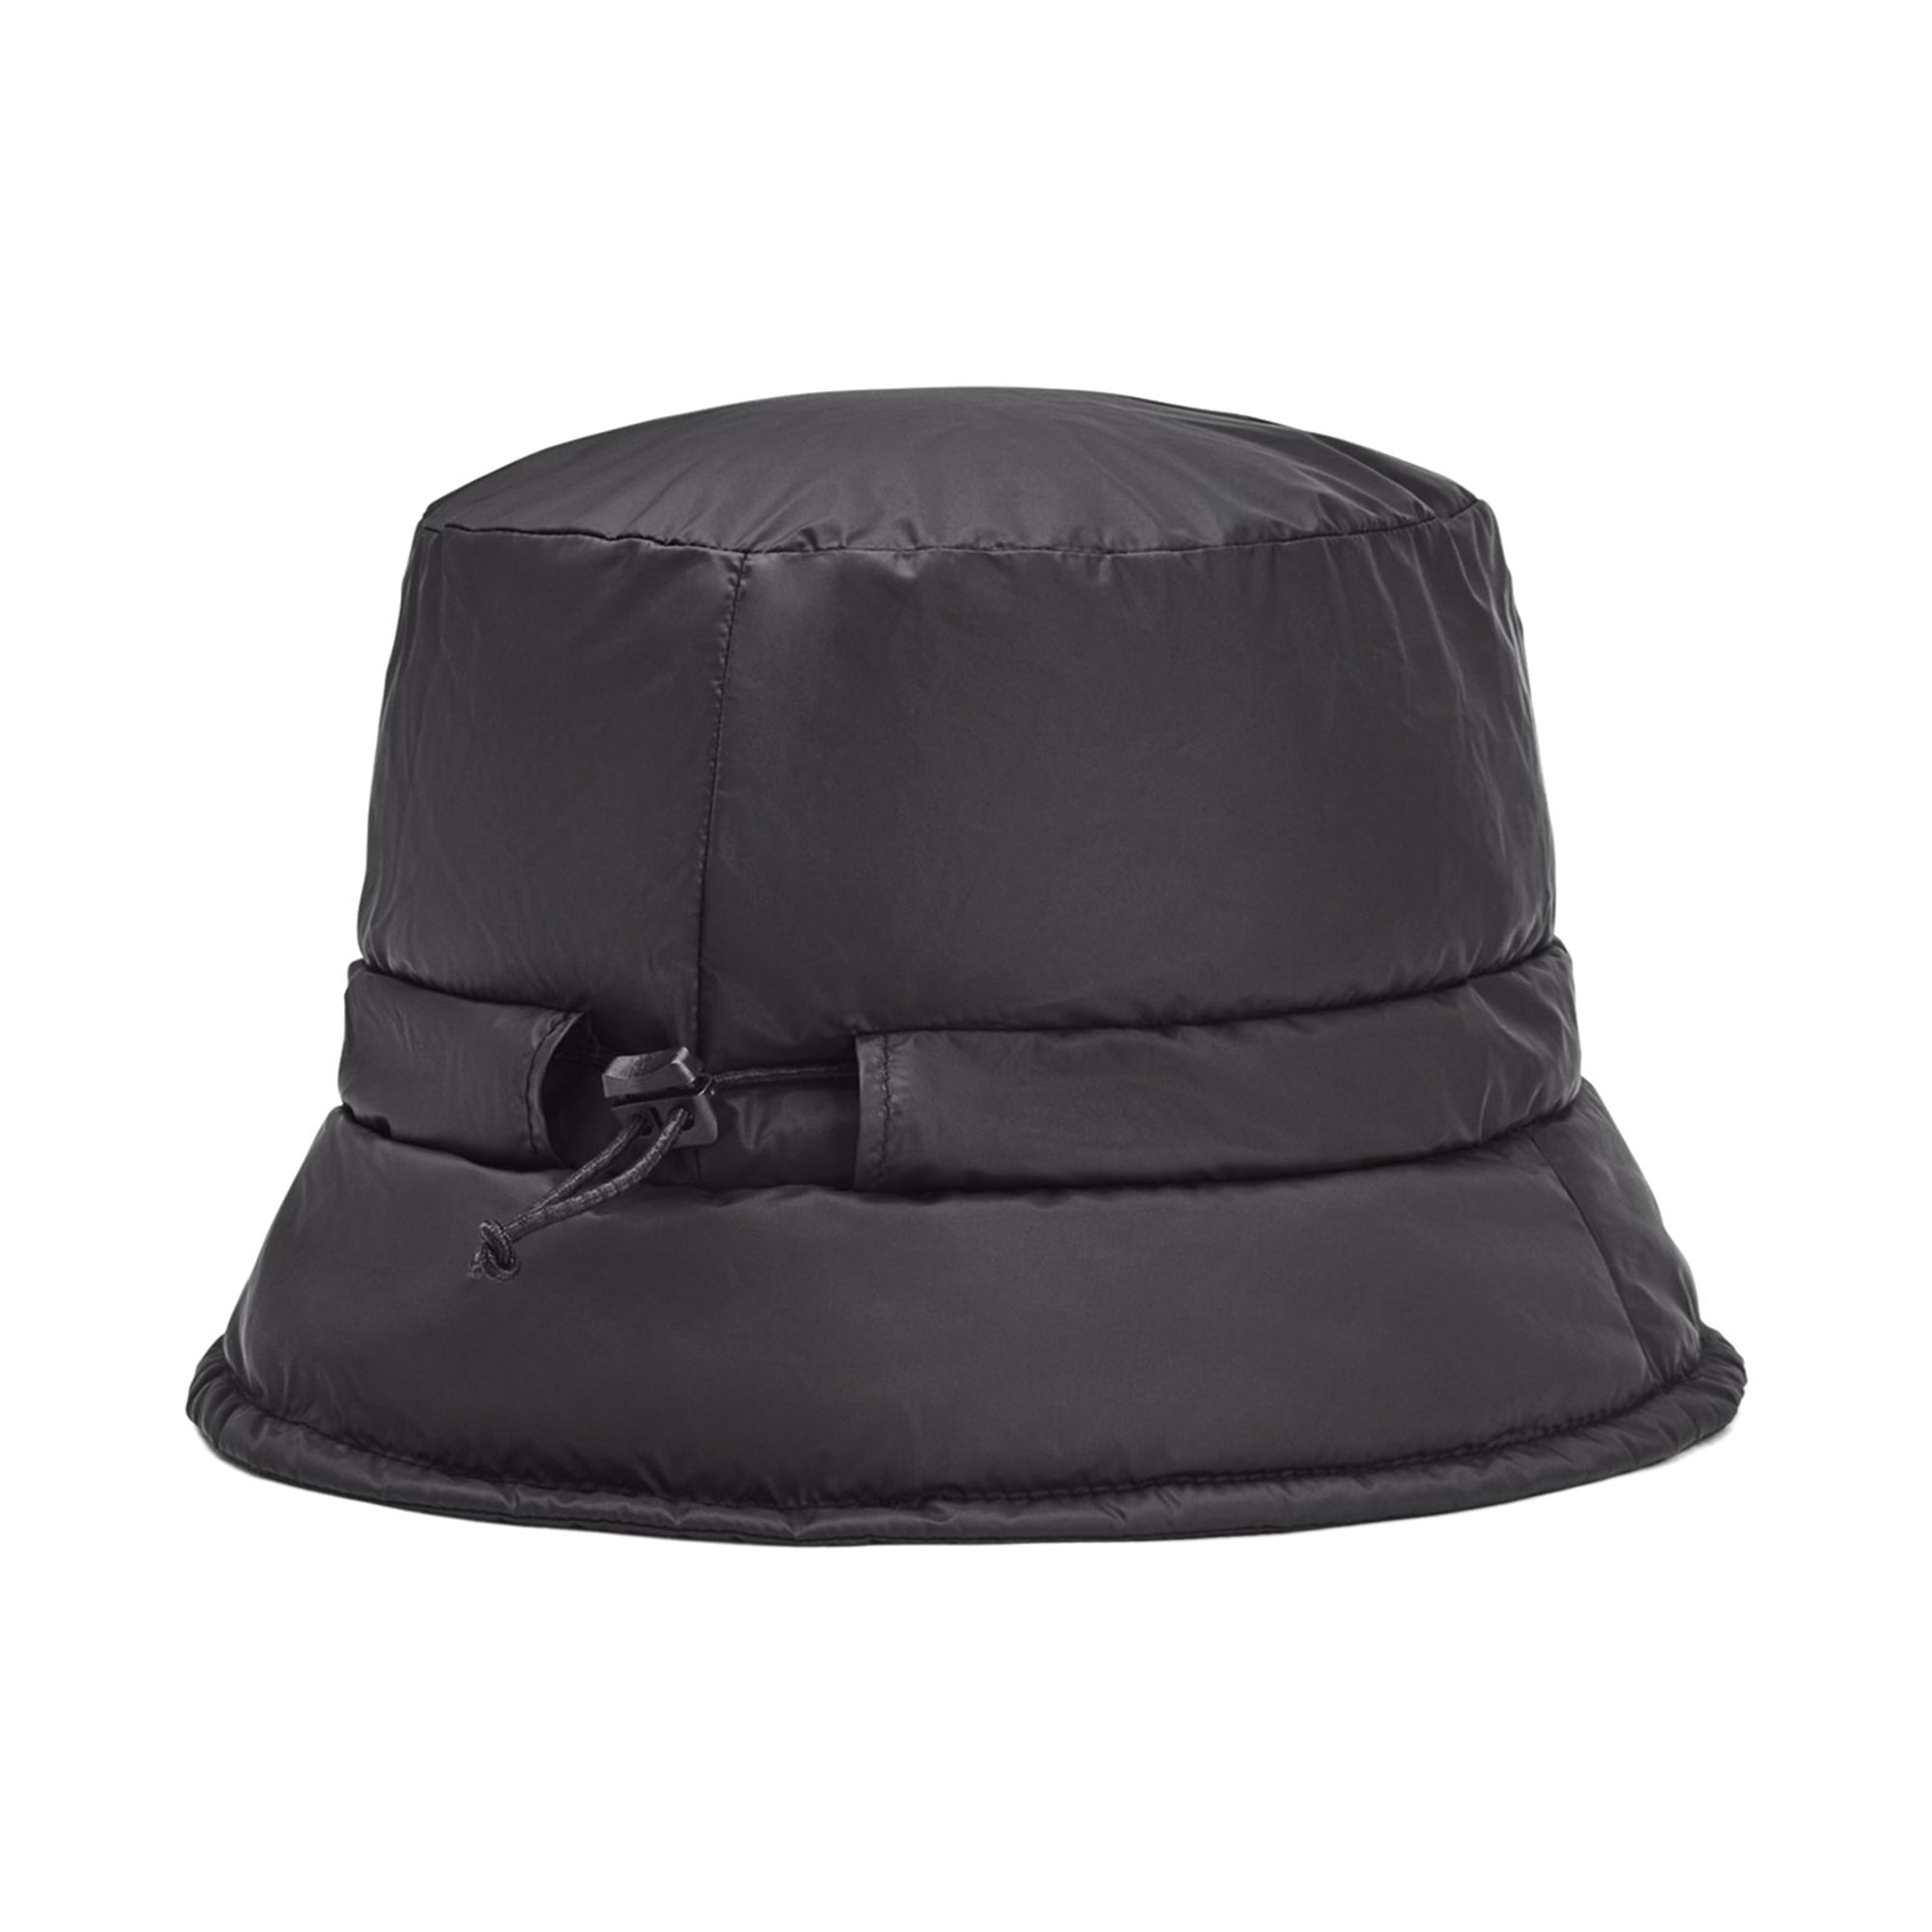 Under Armour Insulated Bucket Hat